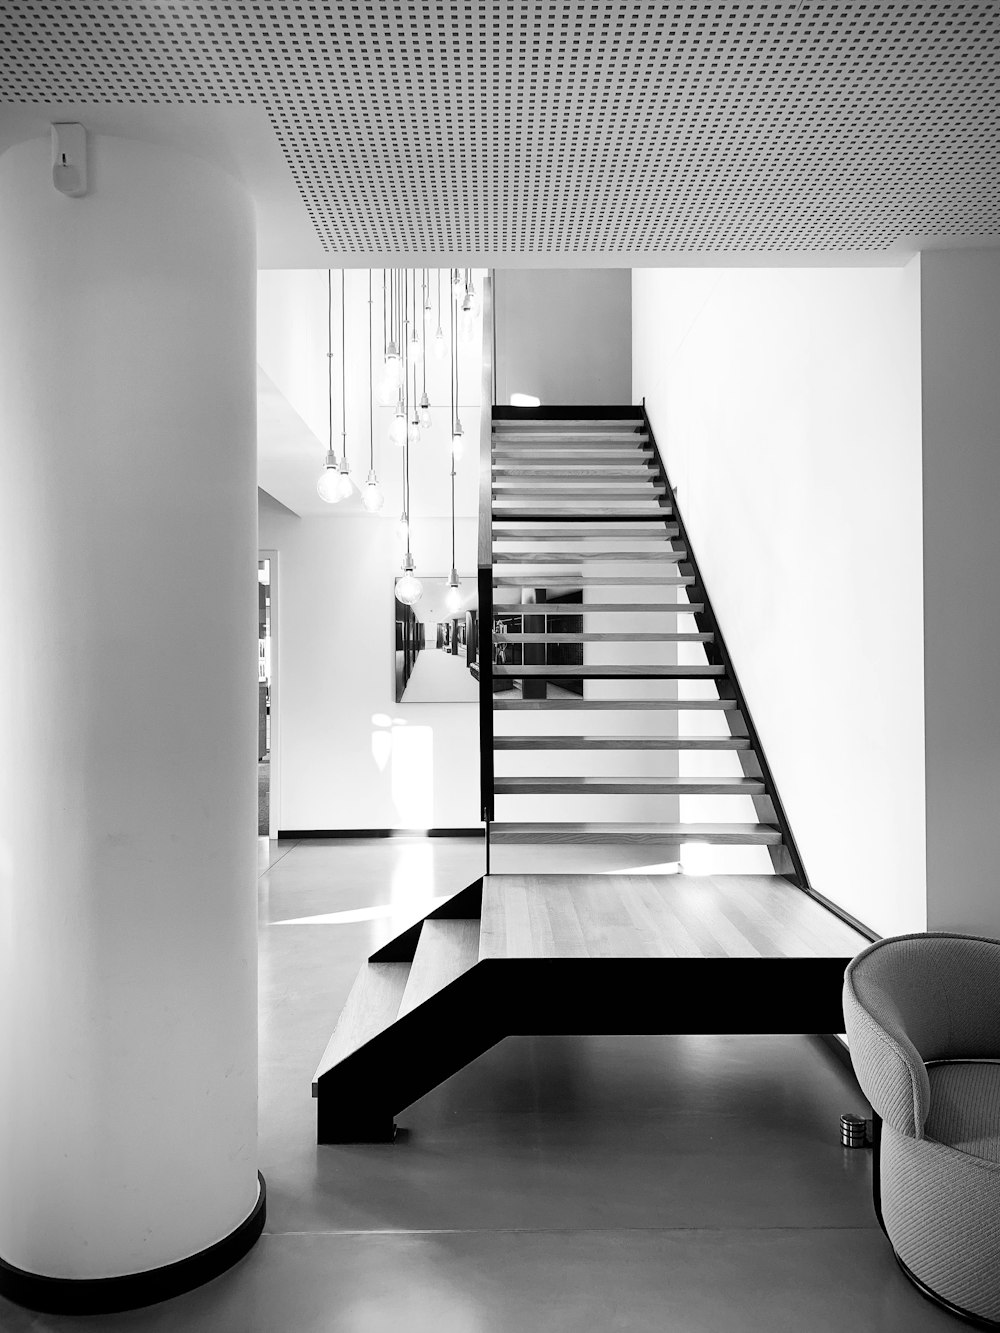 grayscale photo of staircase in building